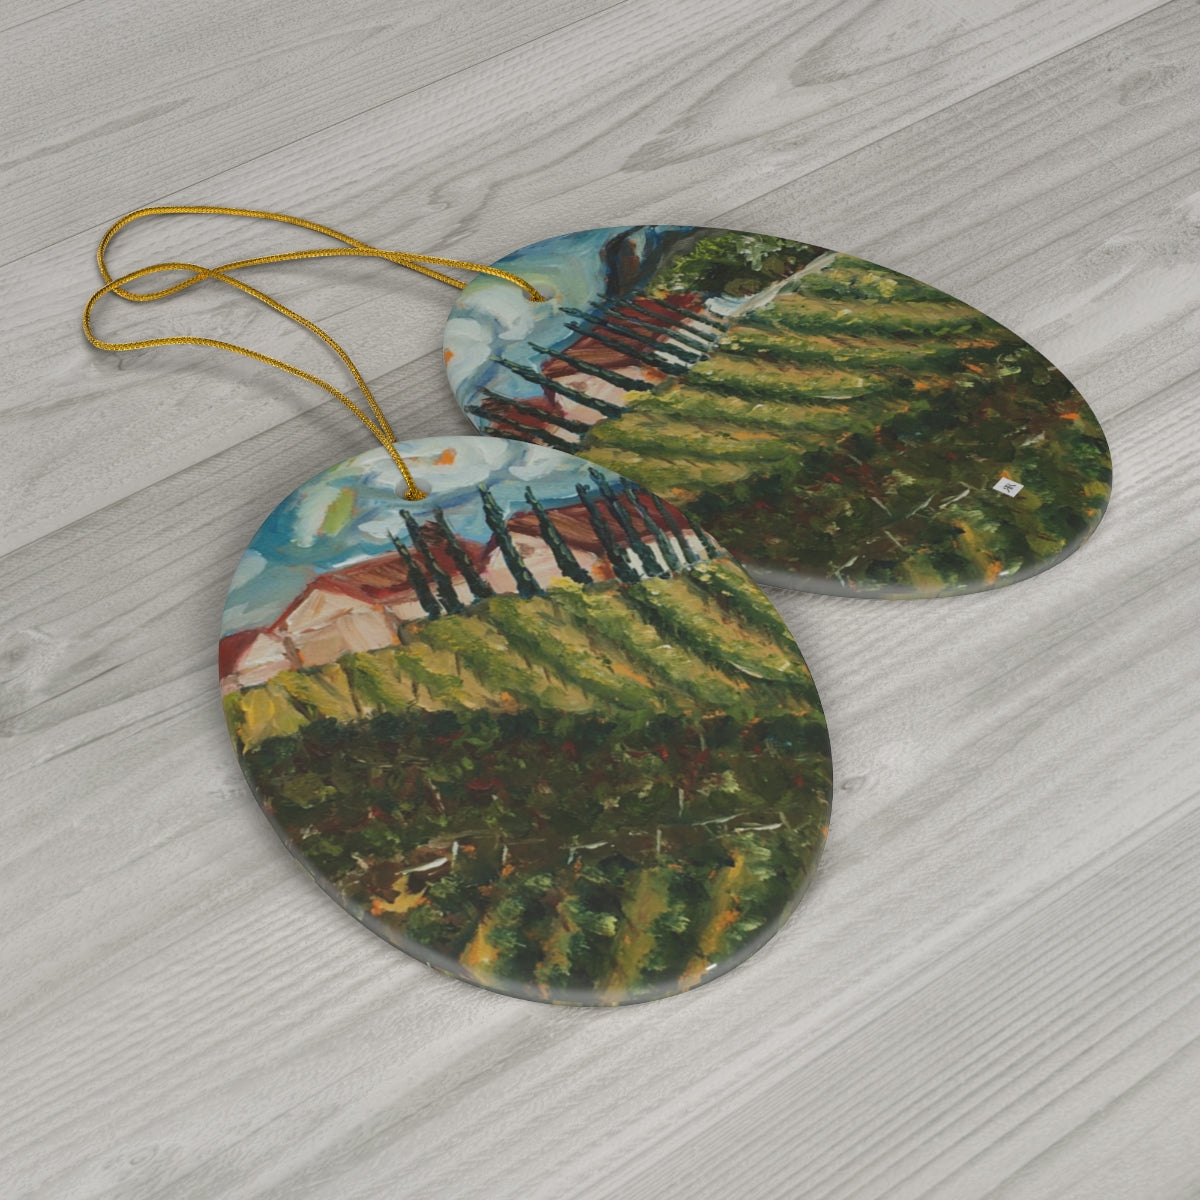 Avensole Vineyard and Winery Ceramic Ornament